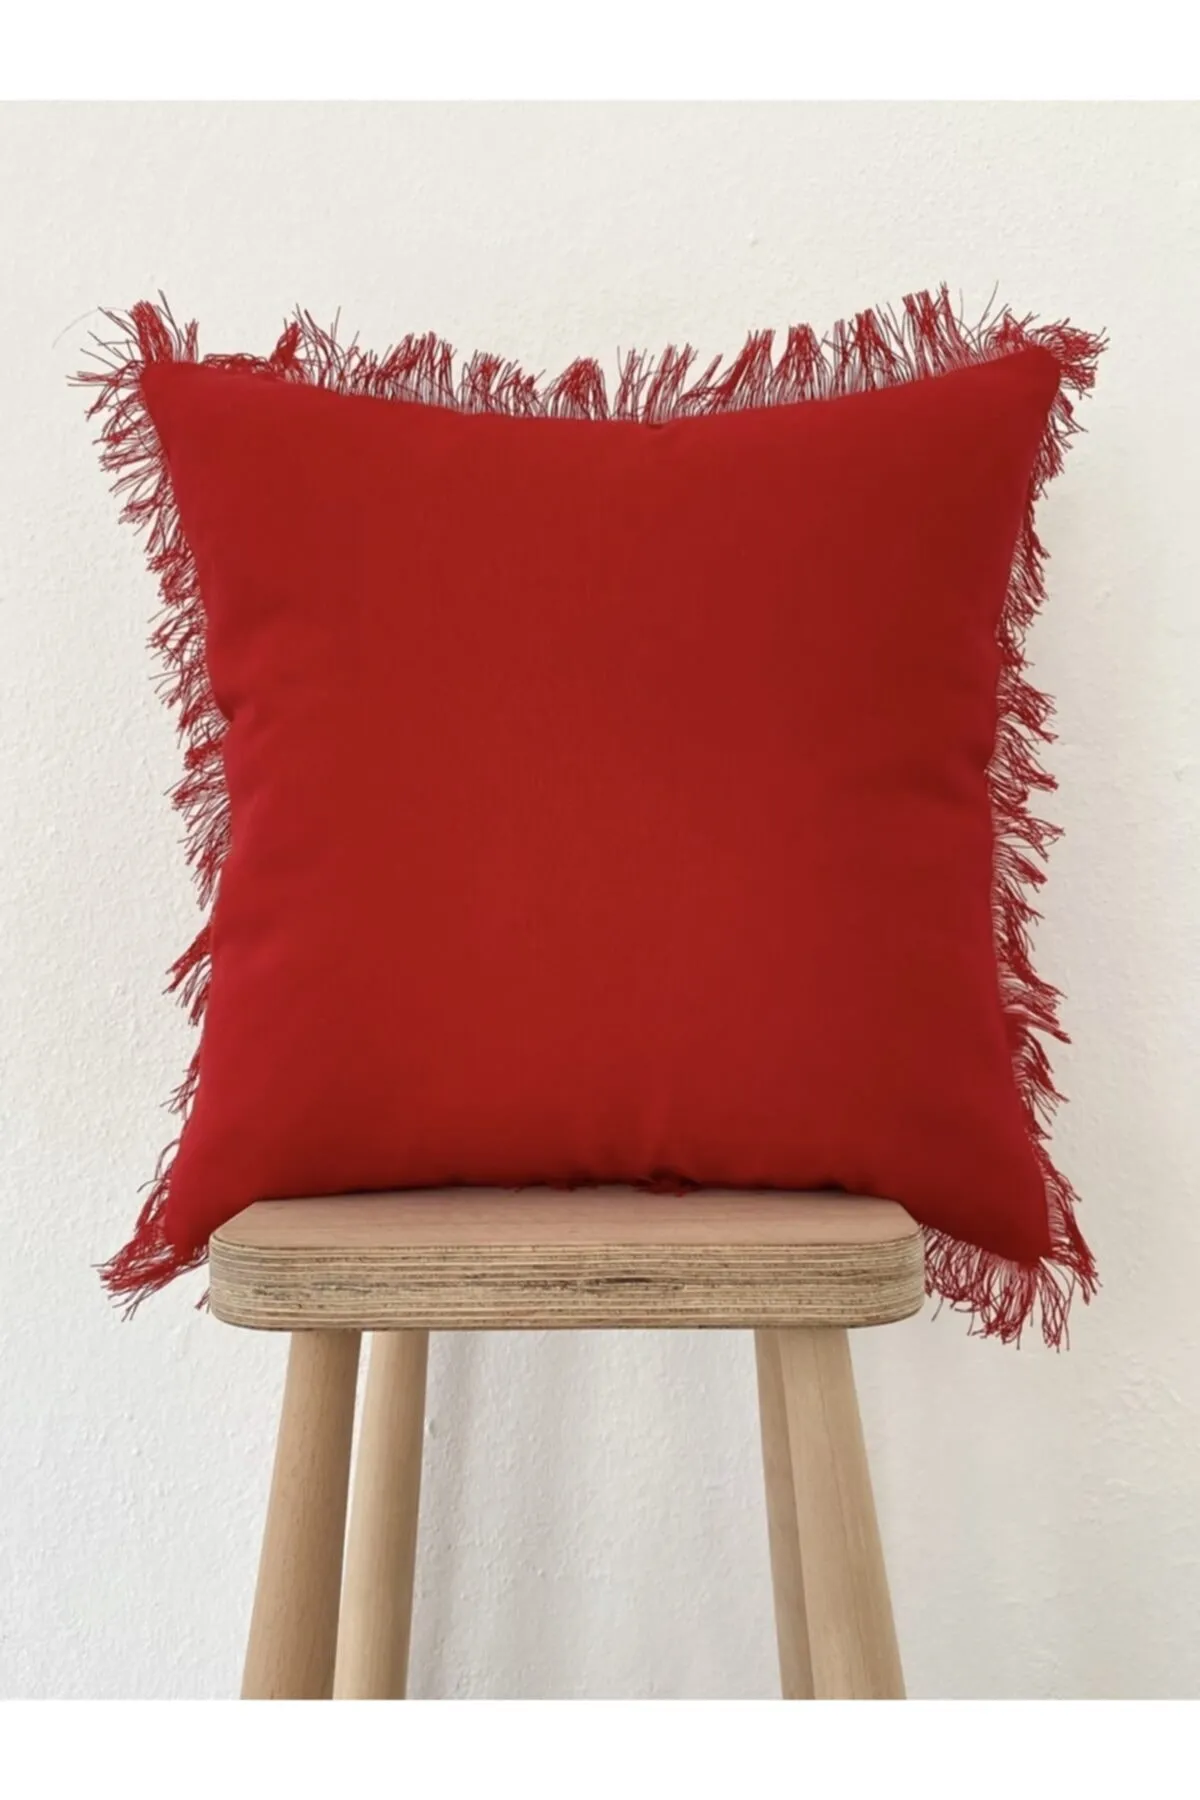 Red Tasseled Cushion Pillow Cover